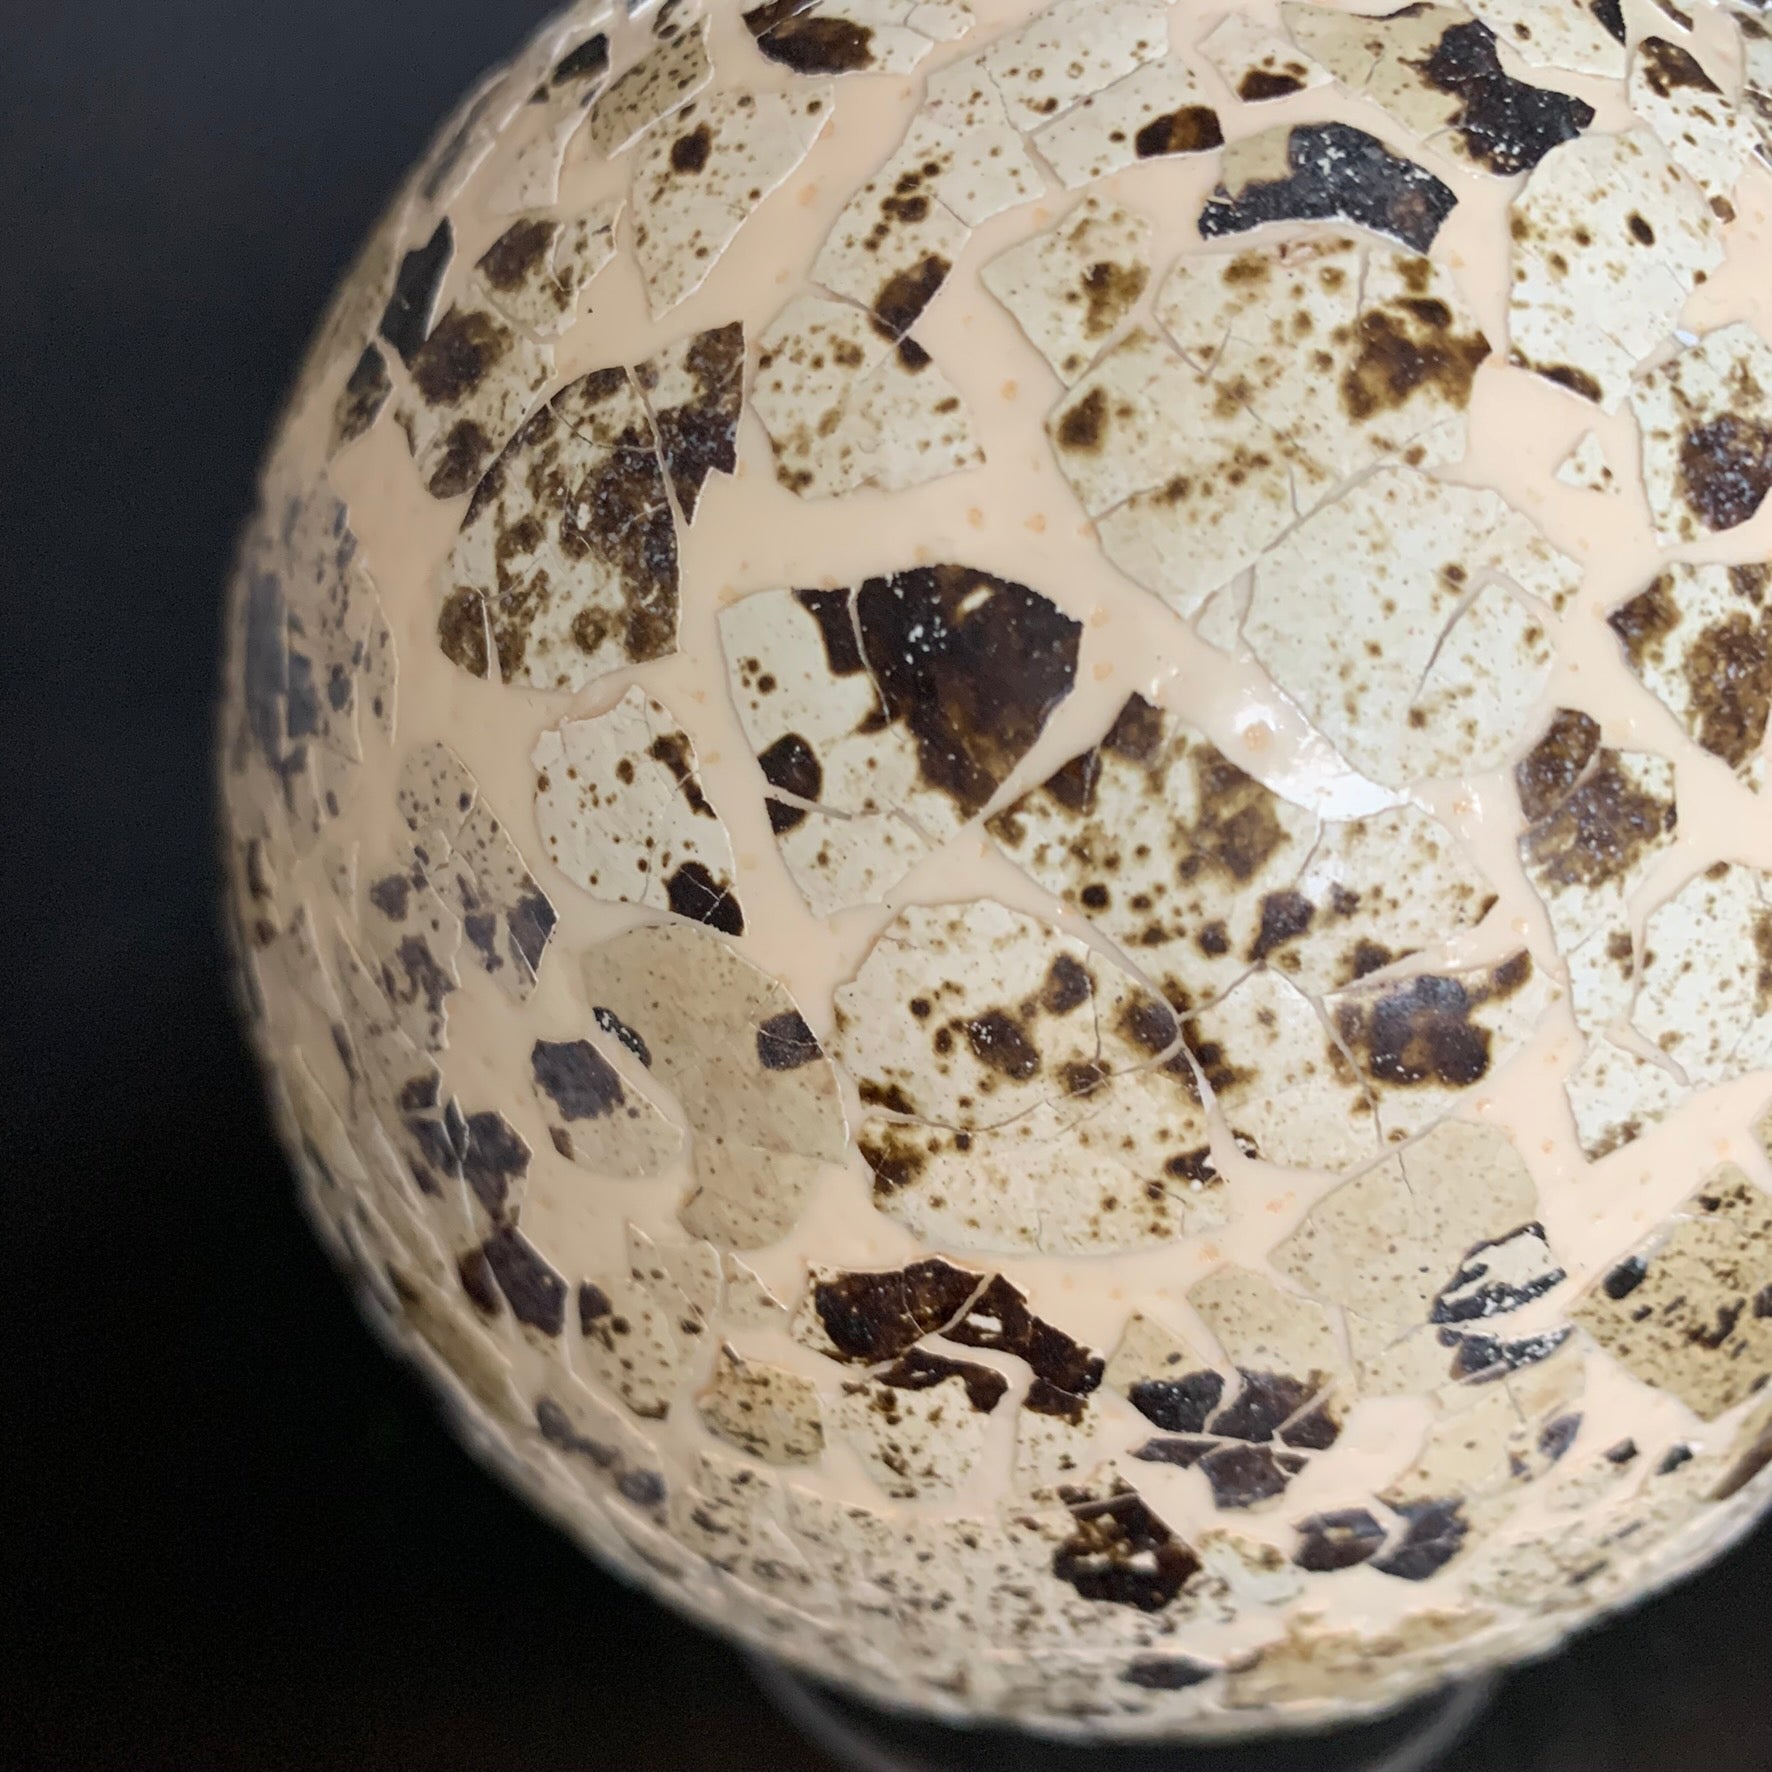 Ostrich egg decorated all around with quail egg shells